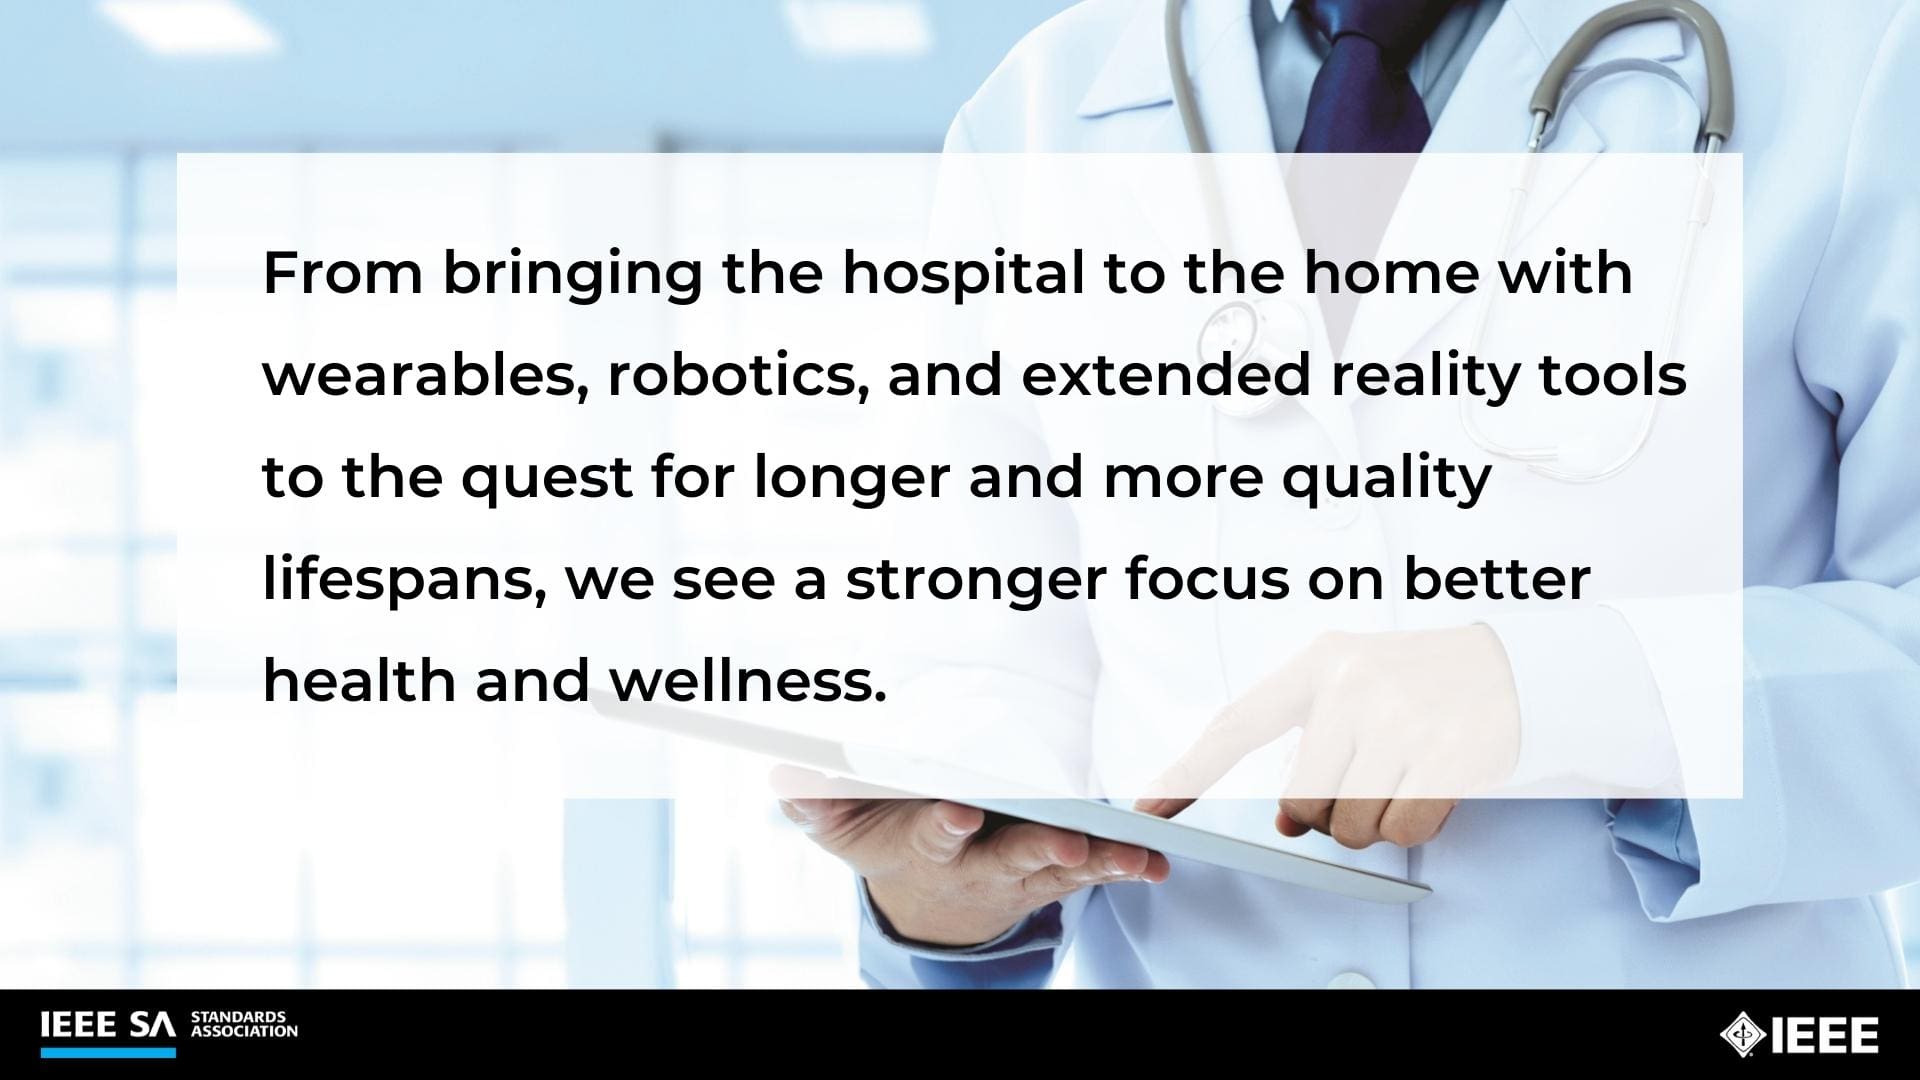 From bringing the hospital to the home with wearables, robotics, and extended reality tools to the quest for longer and more quality lifespans, we see a stronger focus on better health and wellness.